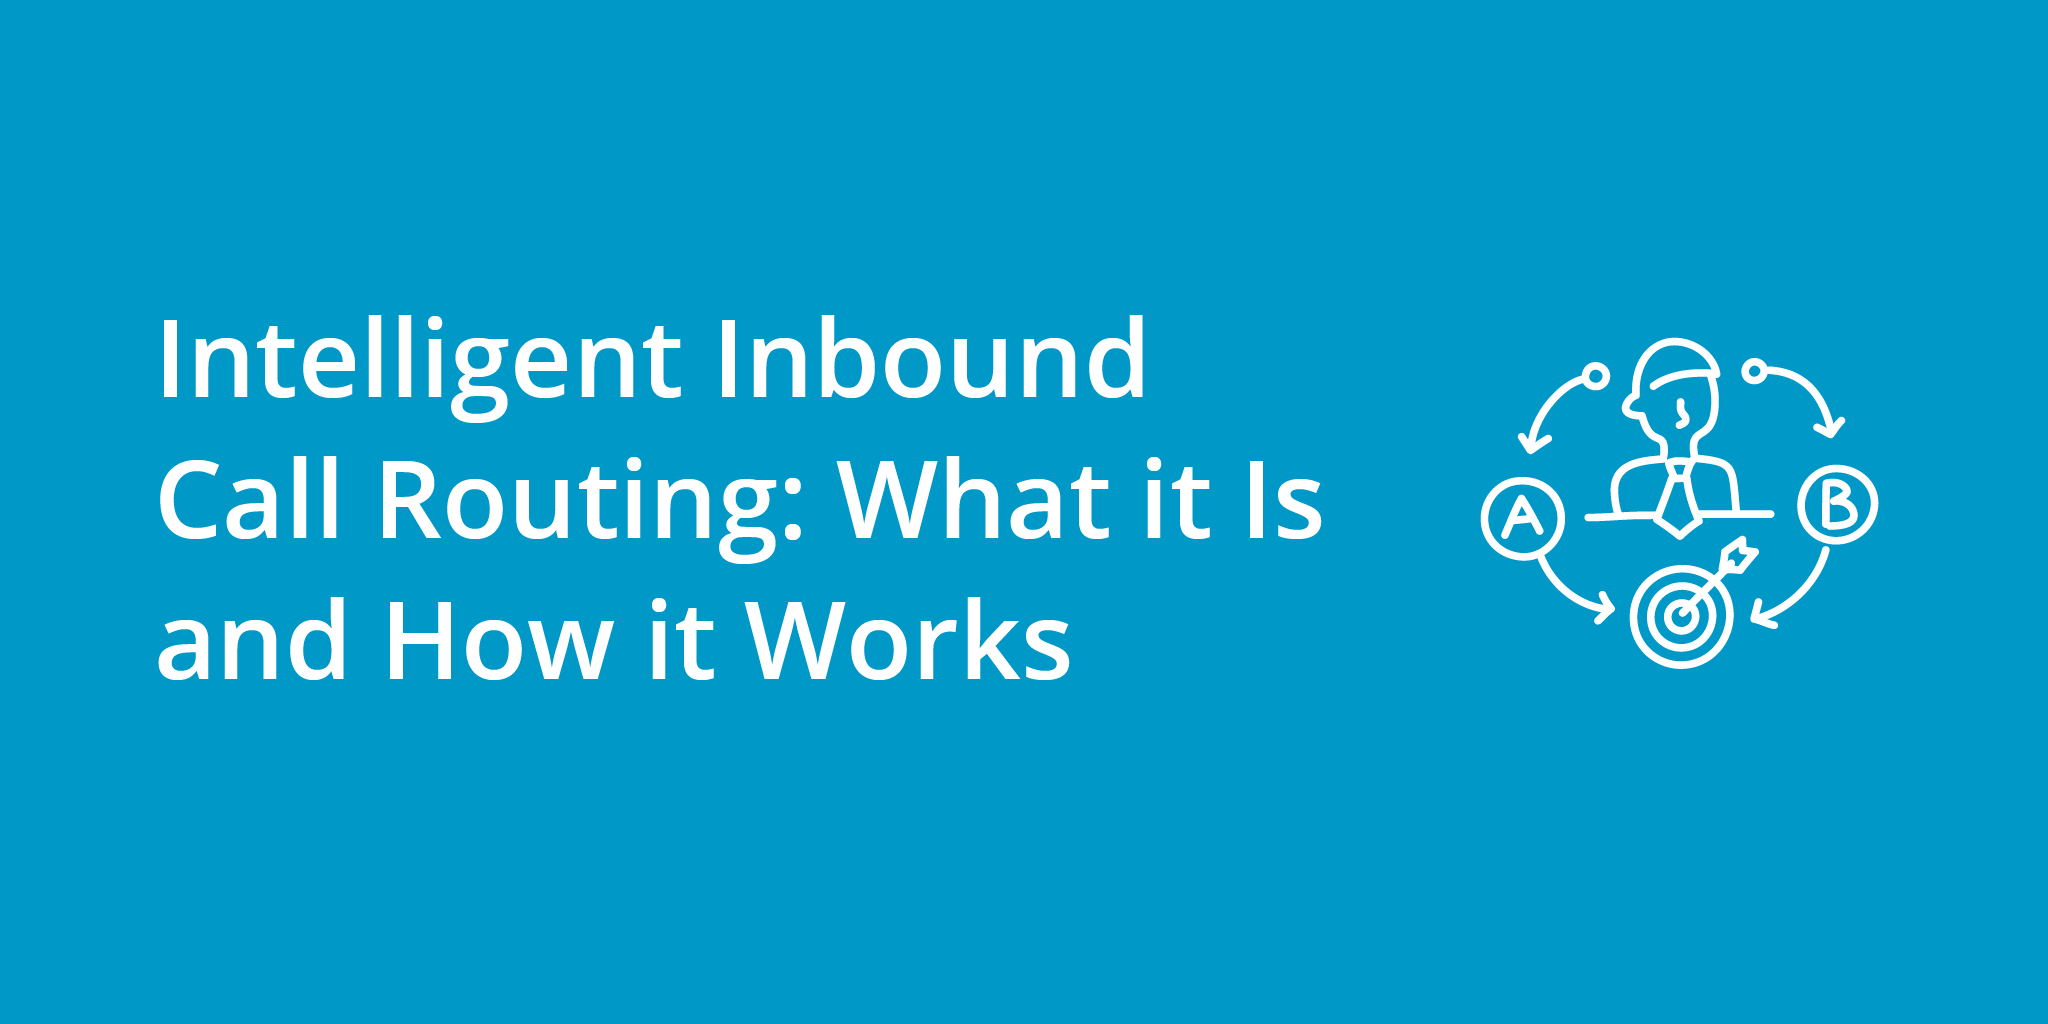 Intelligent Inbound Call Routing: What it Is and How it Works | Telephones for business